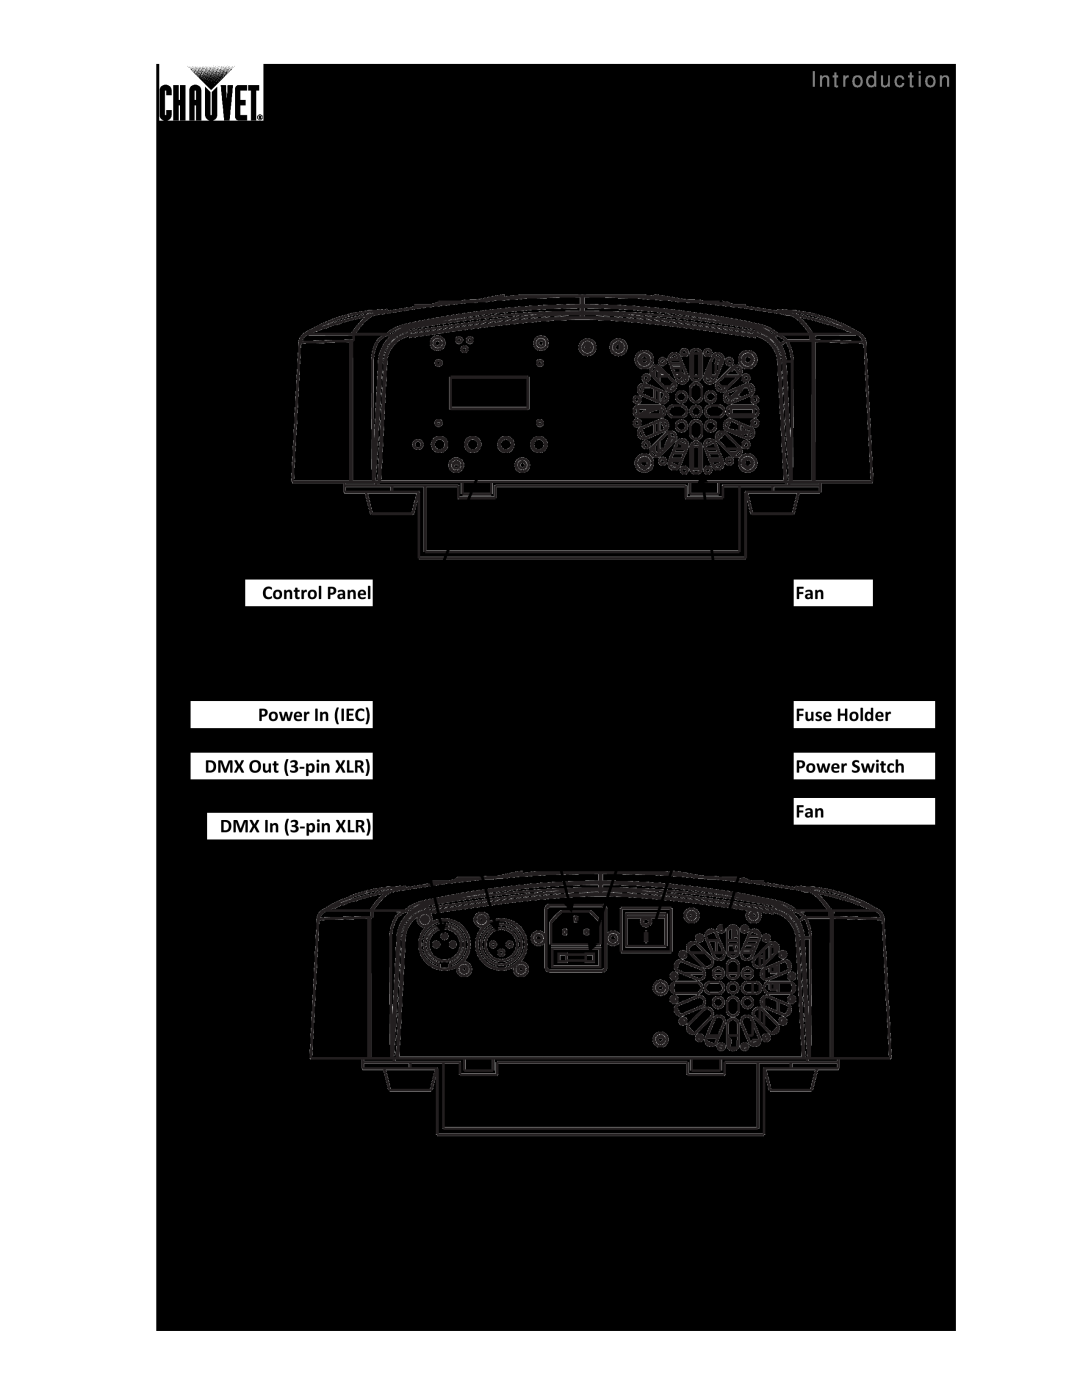 Chauvet 260 LED user manual Product Overview, Introduction, Control Panel Power In IEC DMX Out 3-pinXLR, DMX In 3-pinXLR 